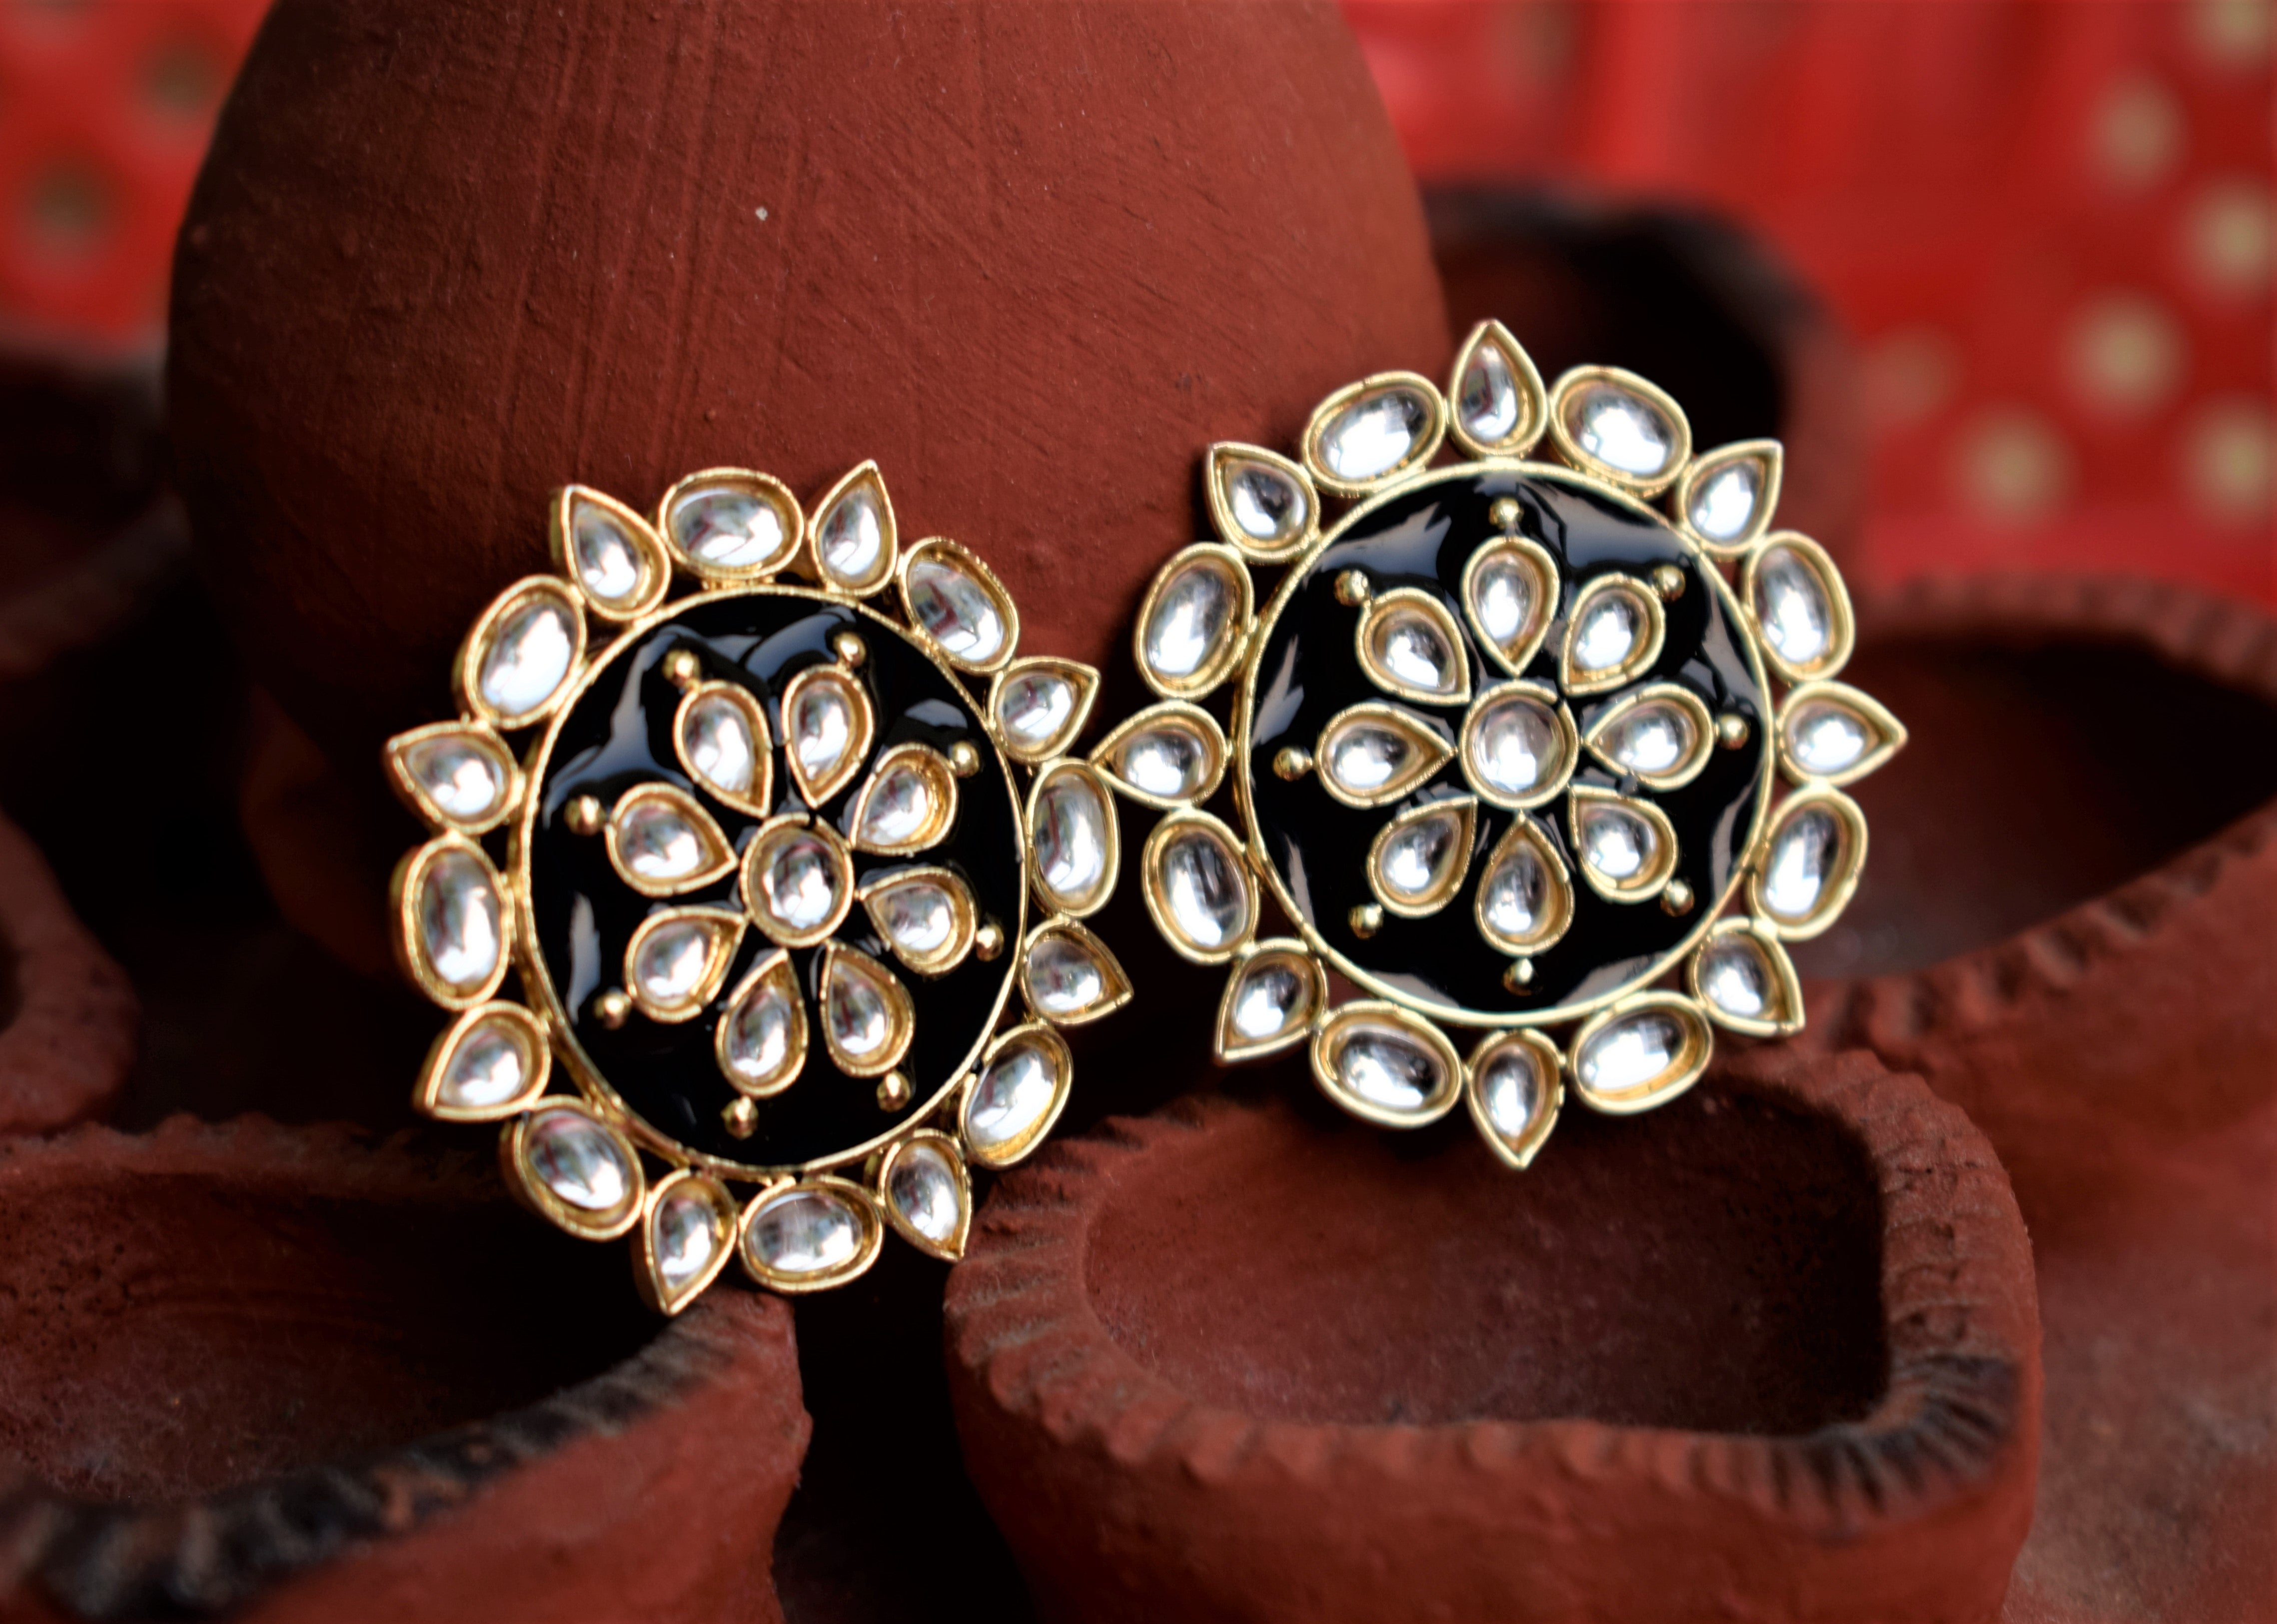 Kundan Earrings by Ombre – The Crescent Moon Shop